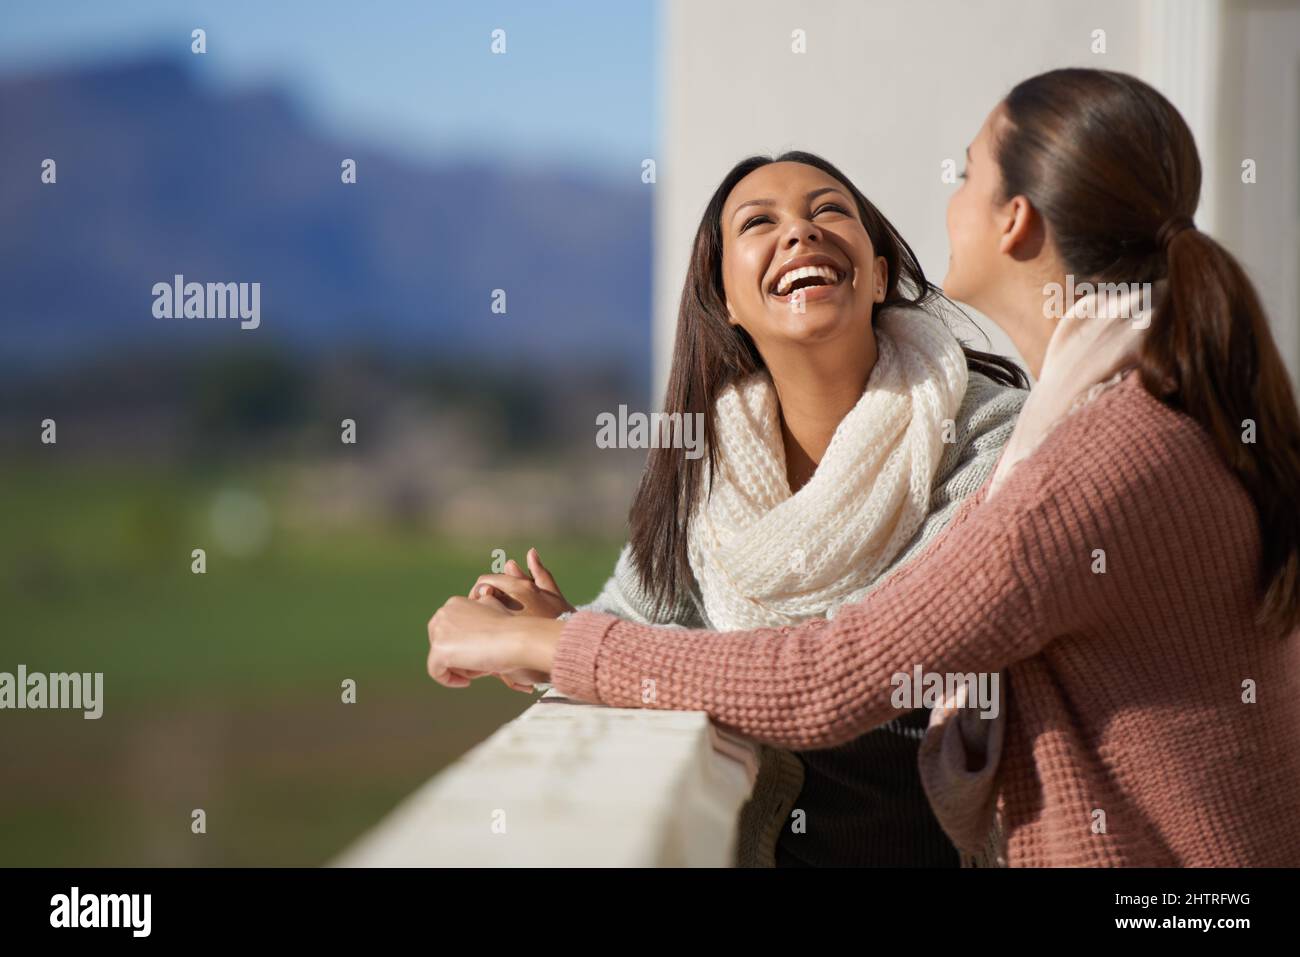 Friendship uplifts the soul. Two lovely woman having a conversation on a balcony. Stock Photo